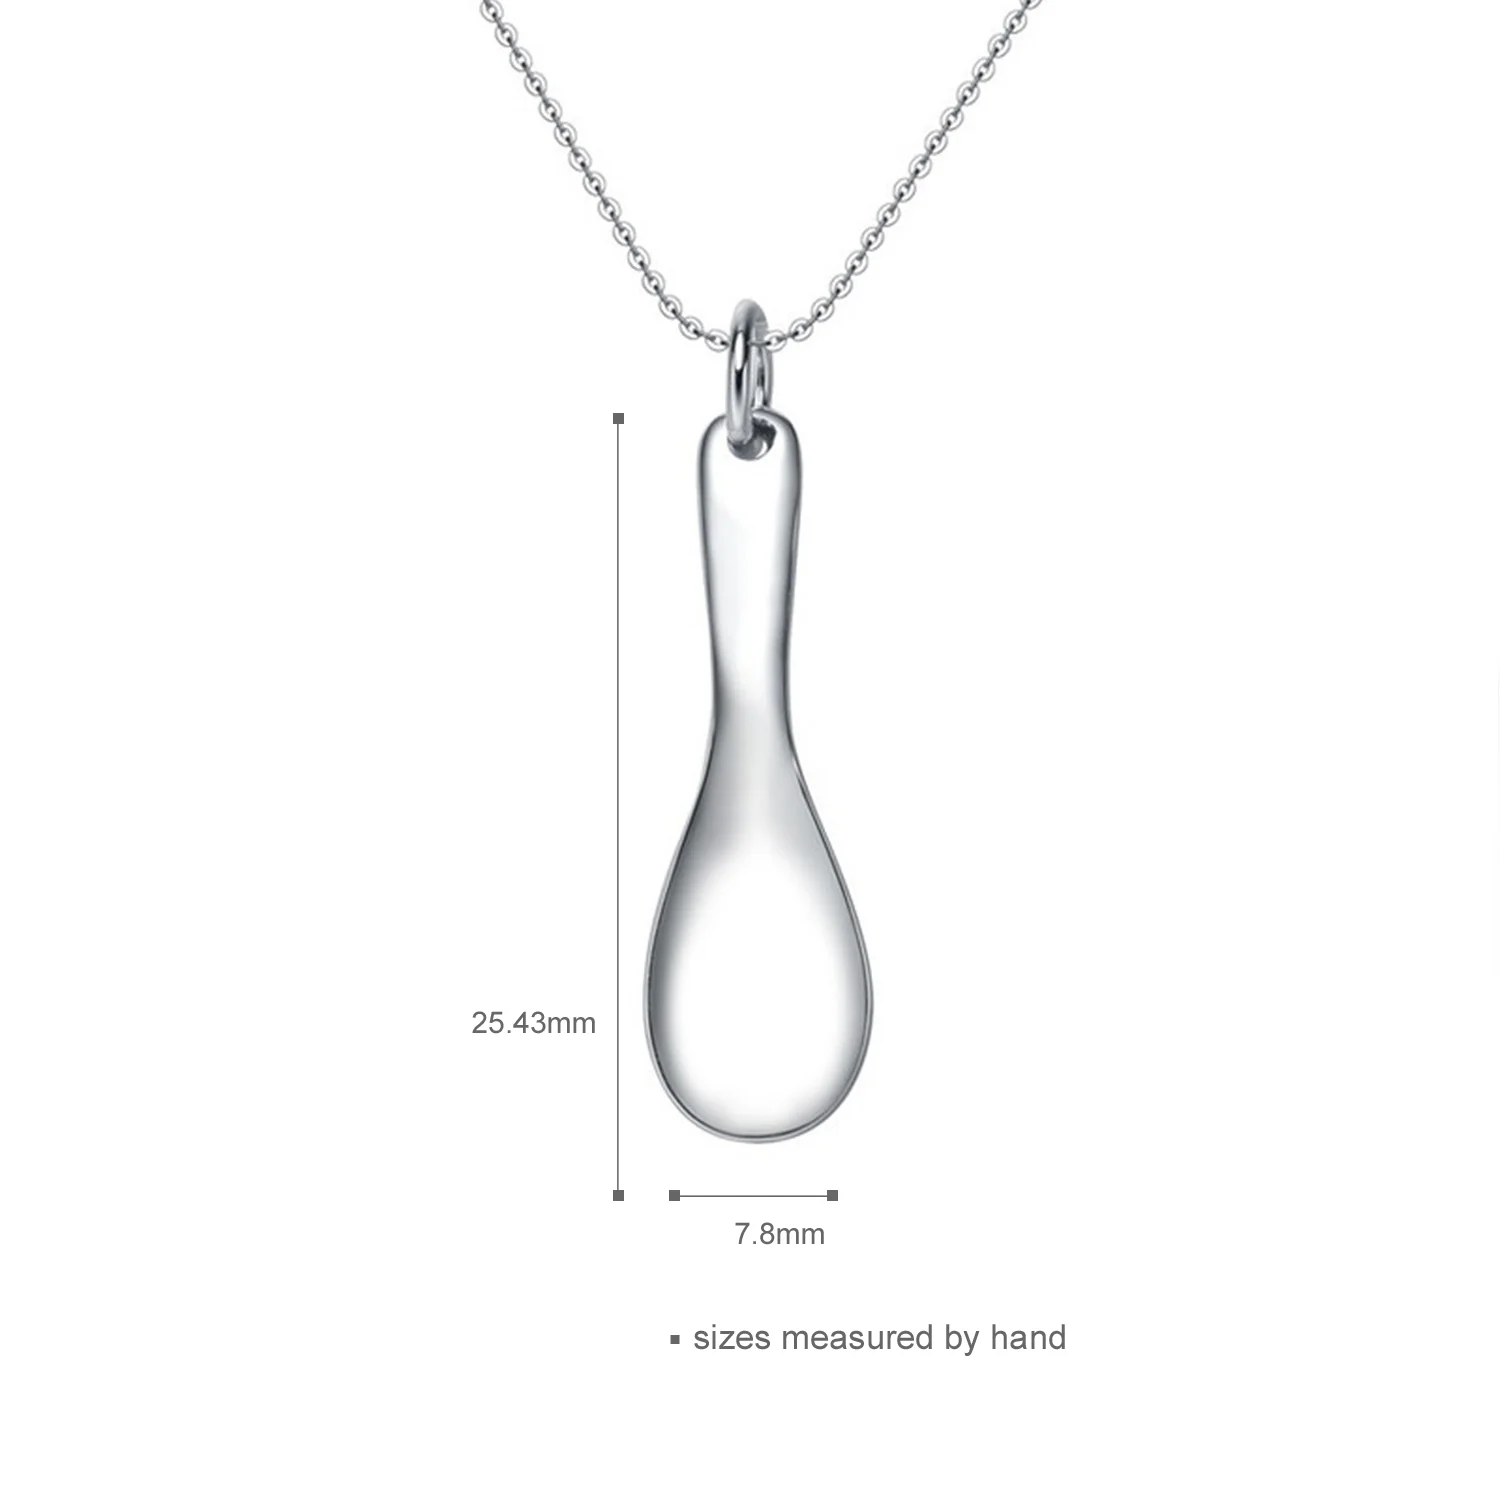 Wholesale necklace jewelry women rhodium plated Cross Chain 925 sterling silver plain spoon necklace(图4)